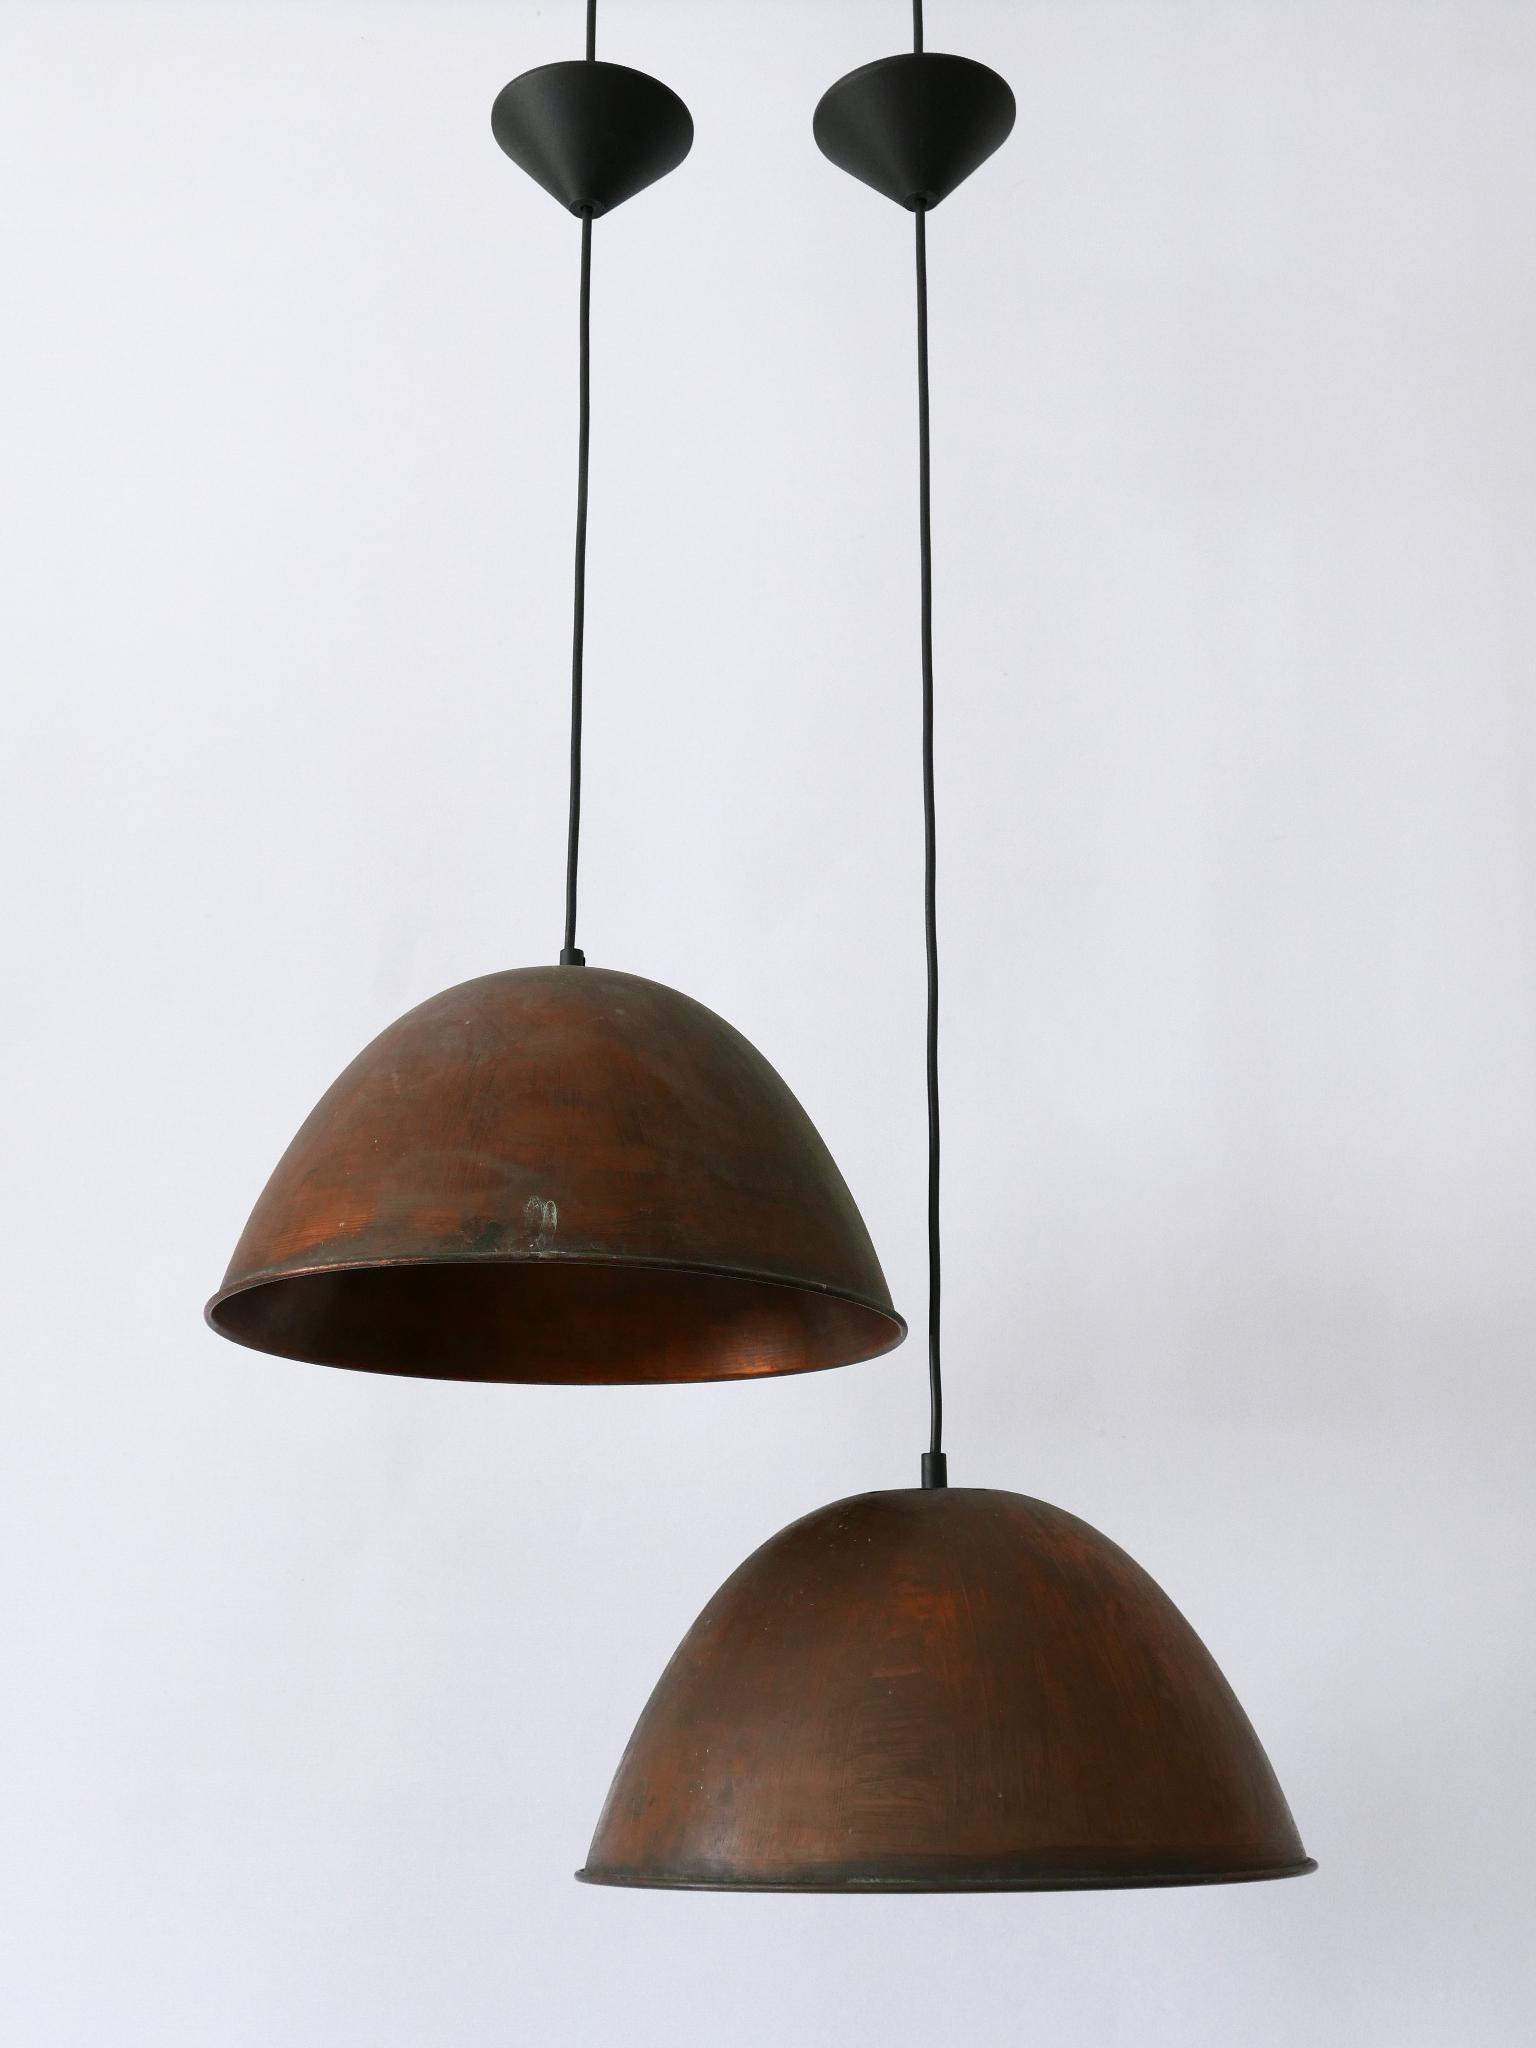 Set of Two Mid-Century Modern Copper Pendant Lamps or Hanging Lights 1950s For Sale 2